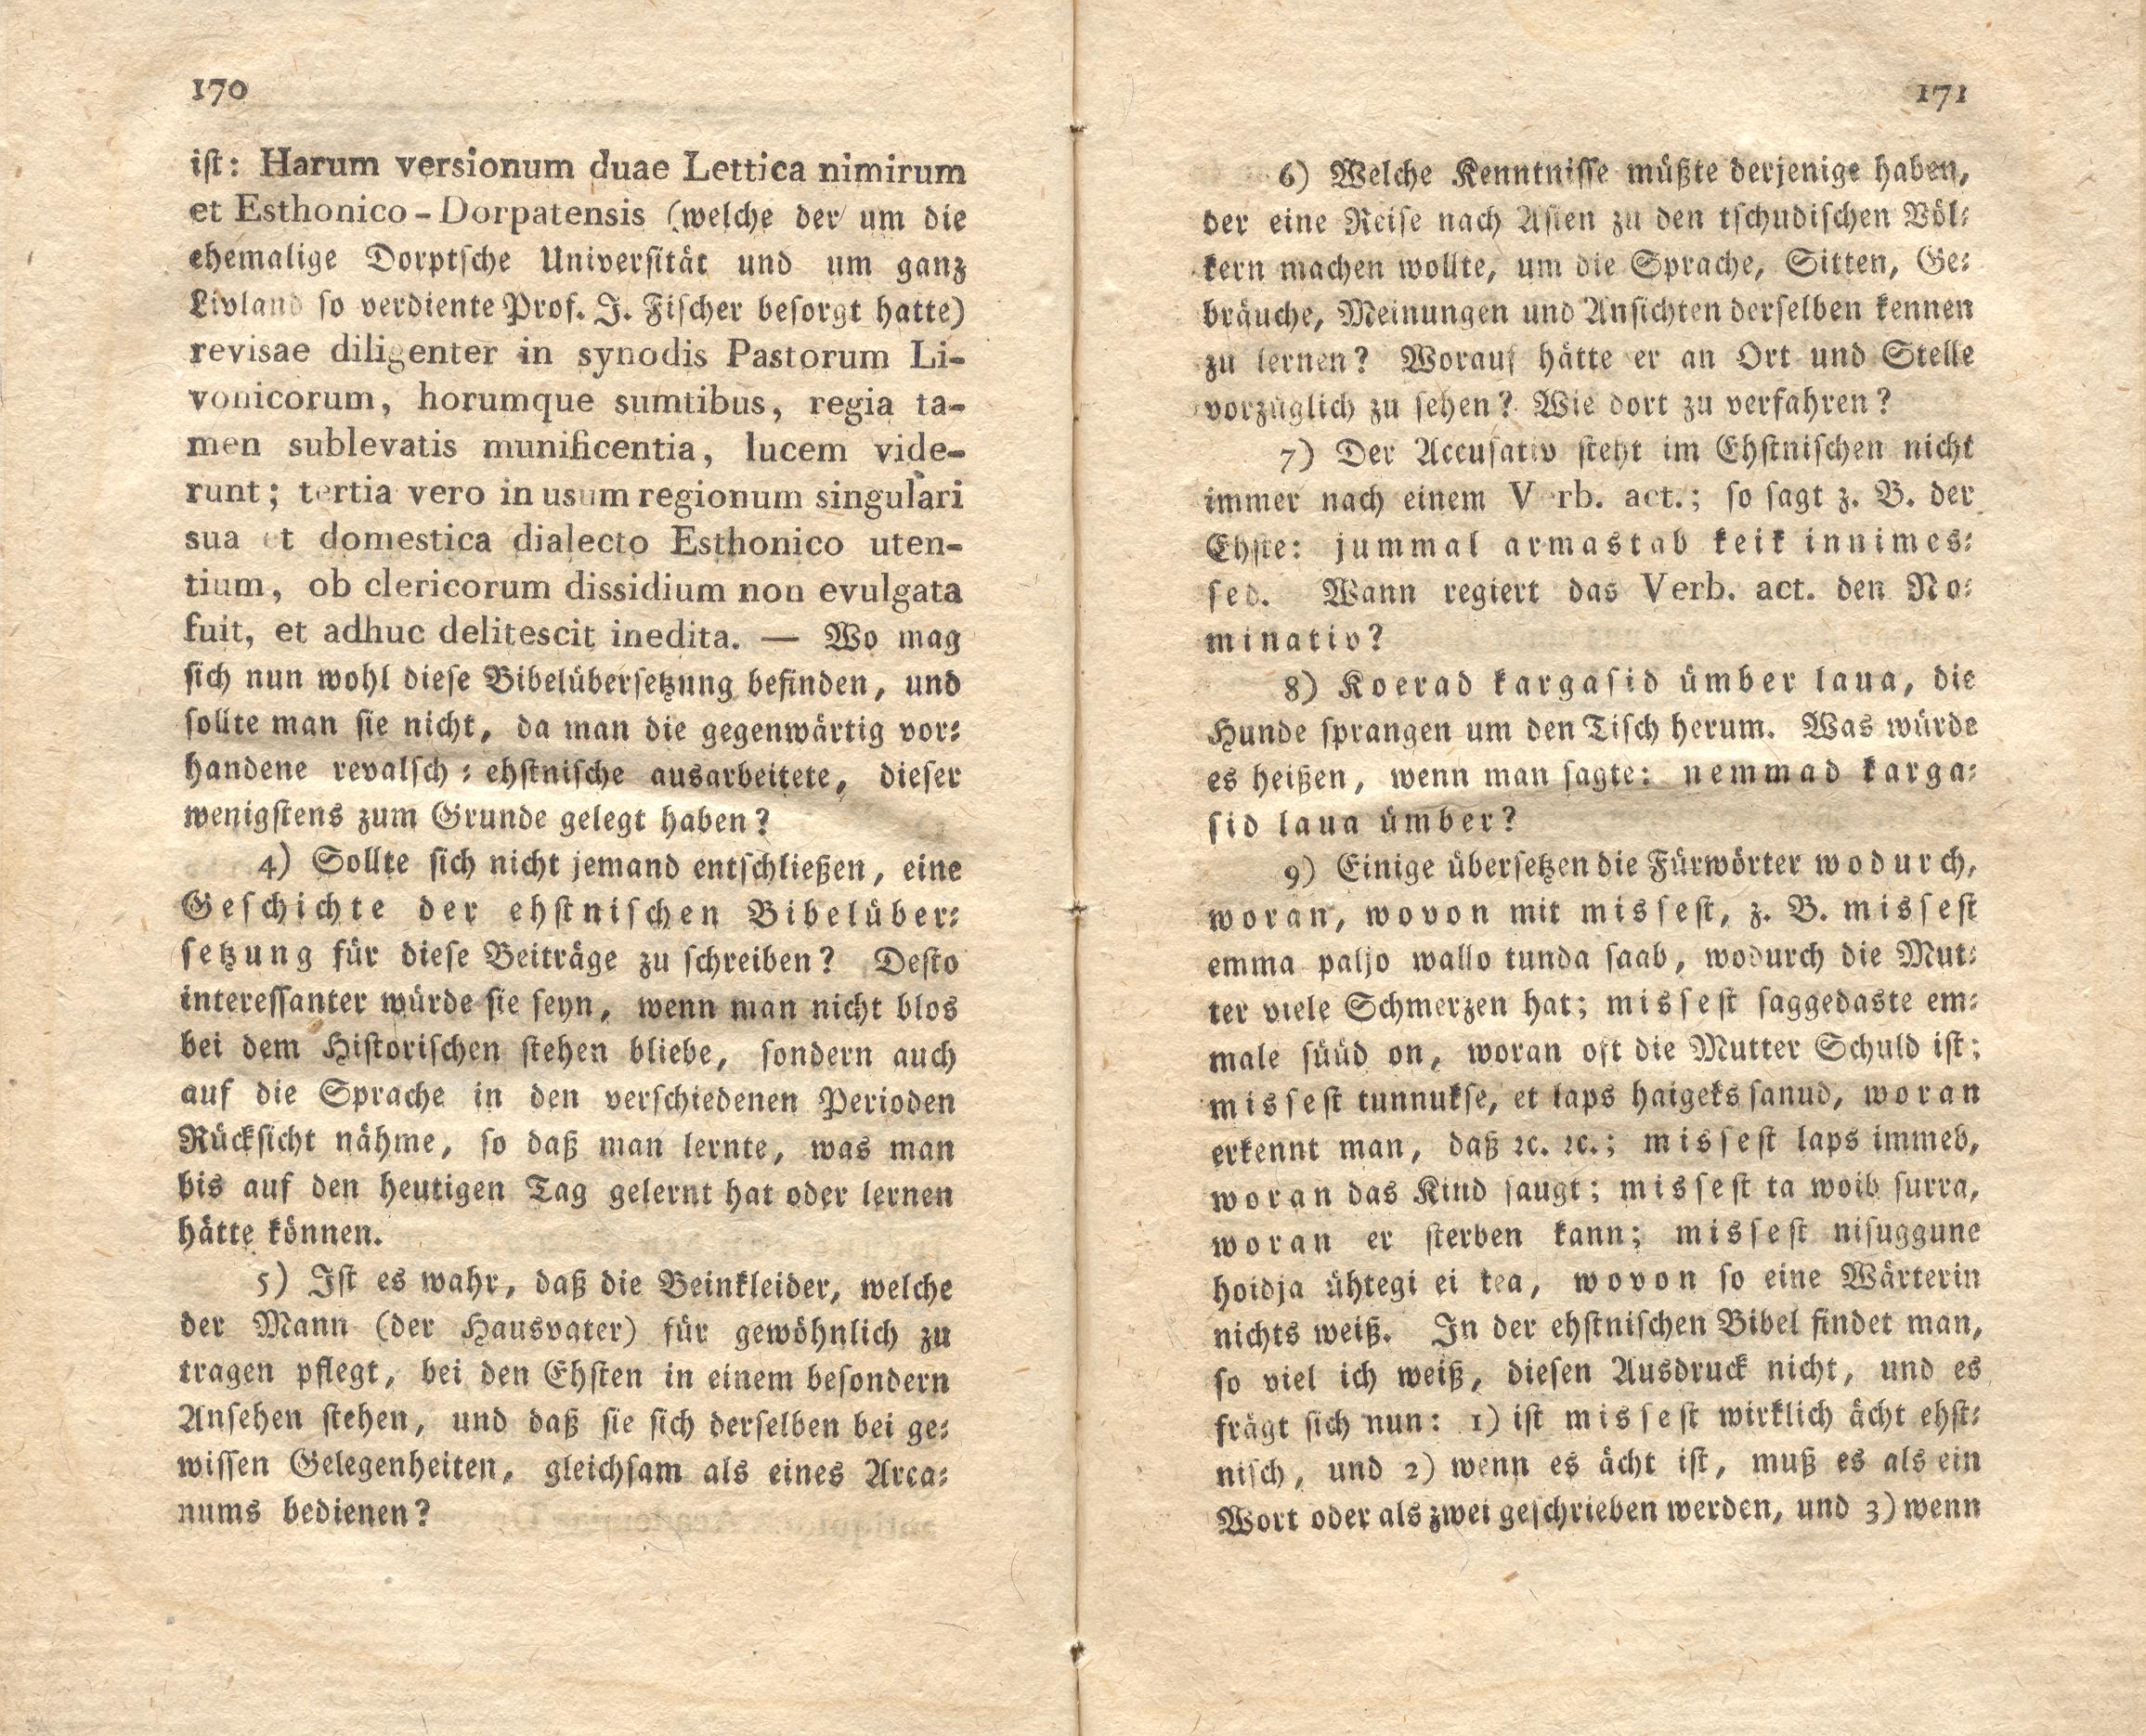 Beiträge [05] (1816) | 87. (170-171) Main body of text